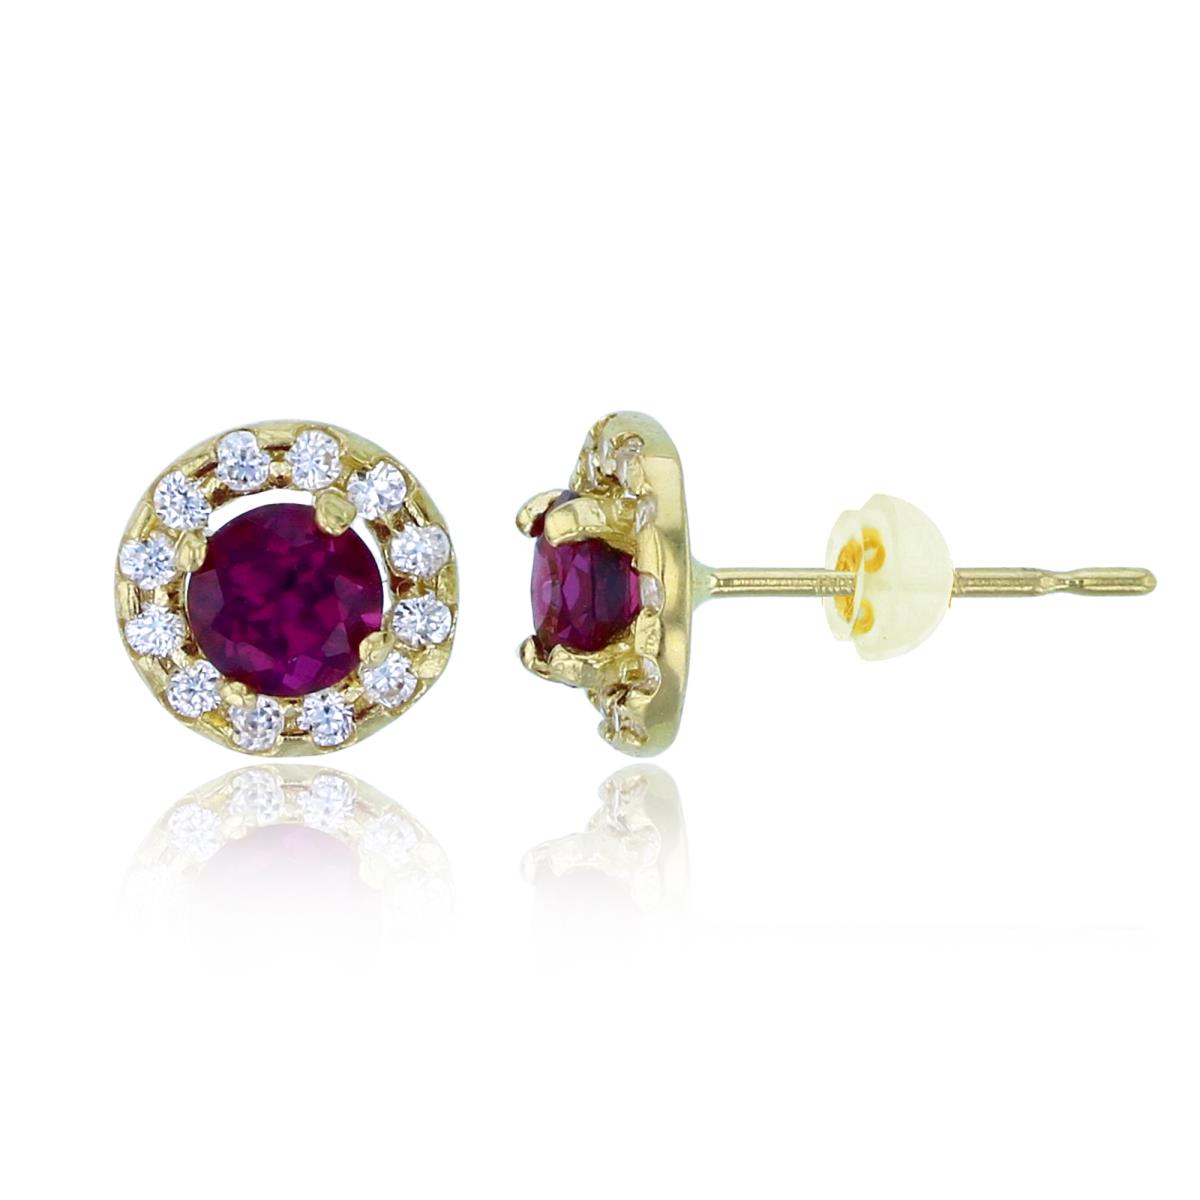 10K Yellow Gold 4mm Rnd Rhodolite & Wh.Zircon Halo Round Studs with Silicon Backs